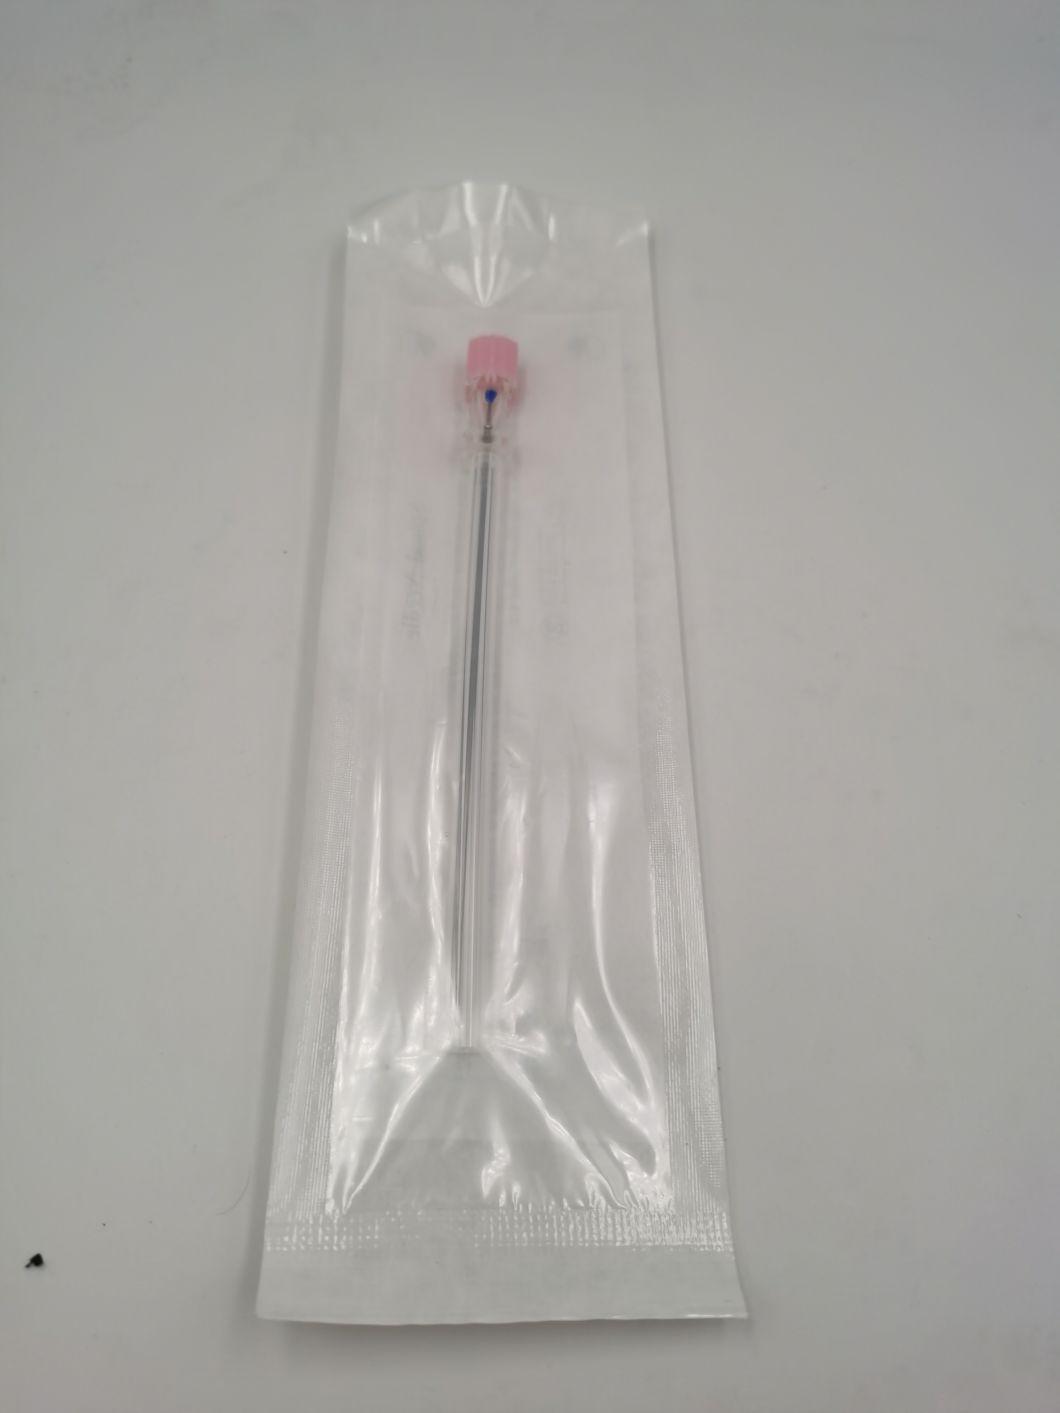 Disposable Sterile Spinal Anesthesia Needle for Lumbar Puncture with Pencil Quickle Point